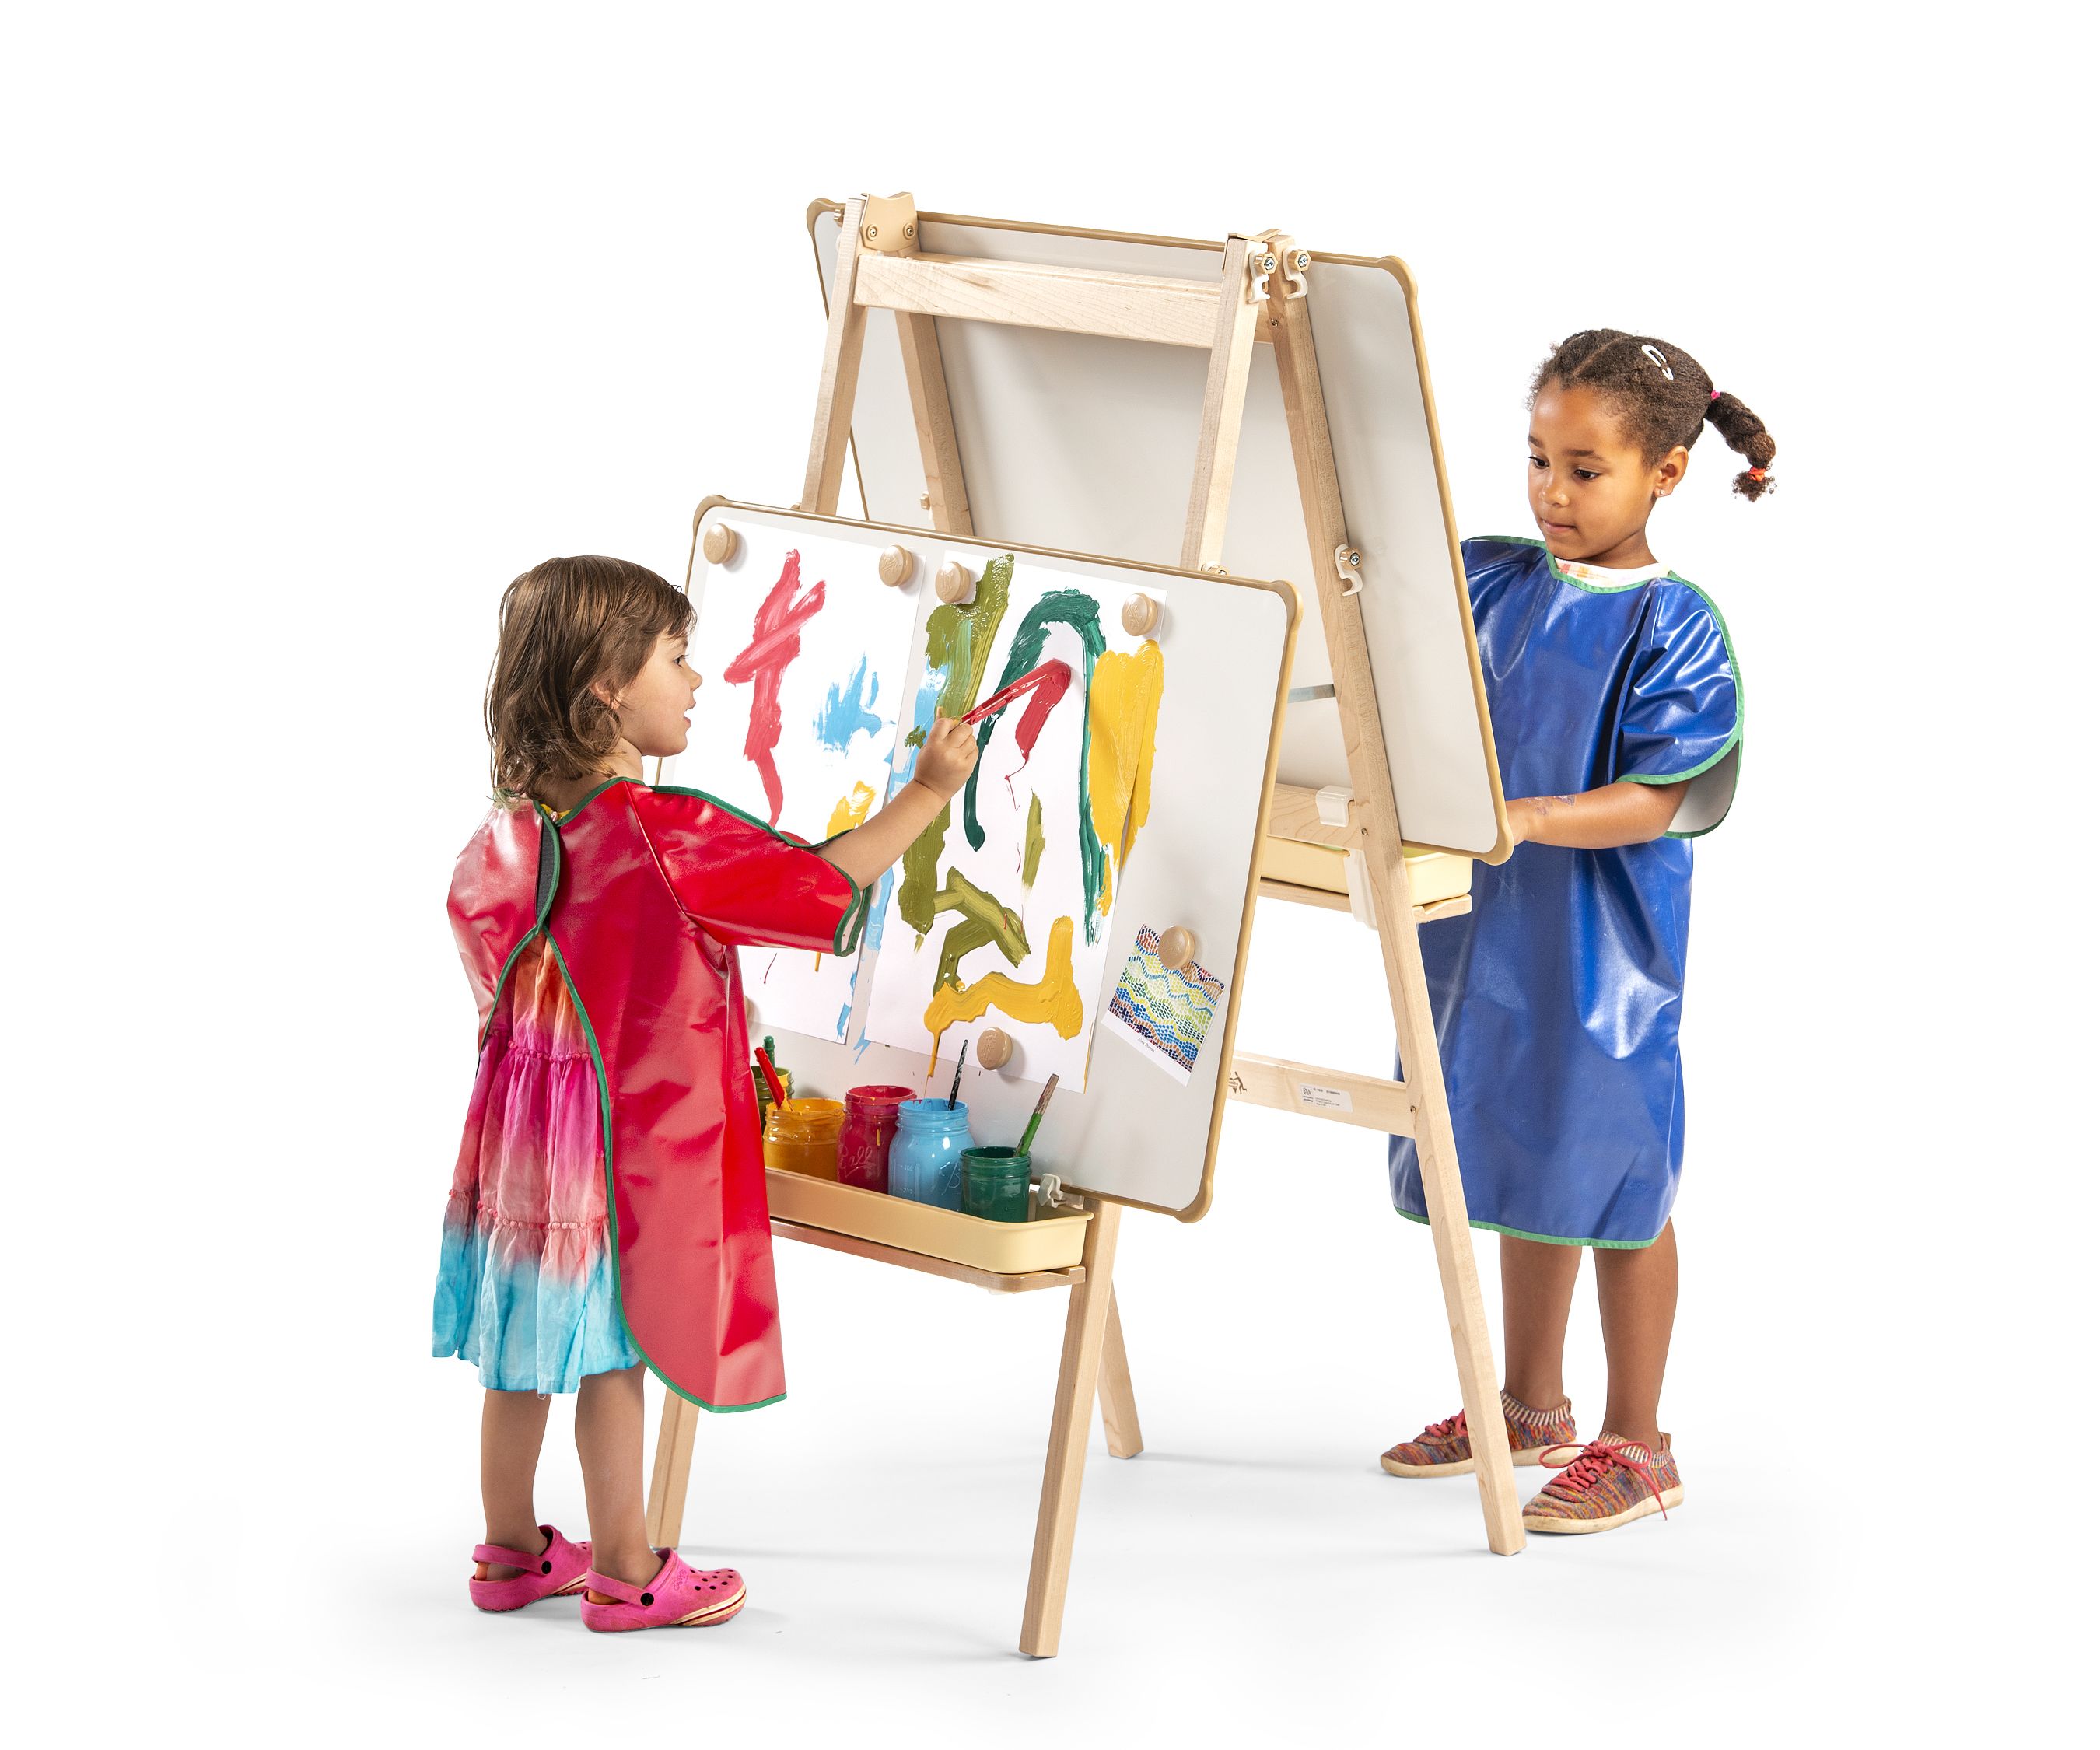 Teacher Easels & Classroom Easels - Today's Classroom